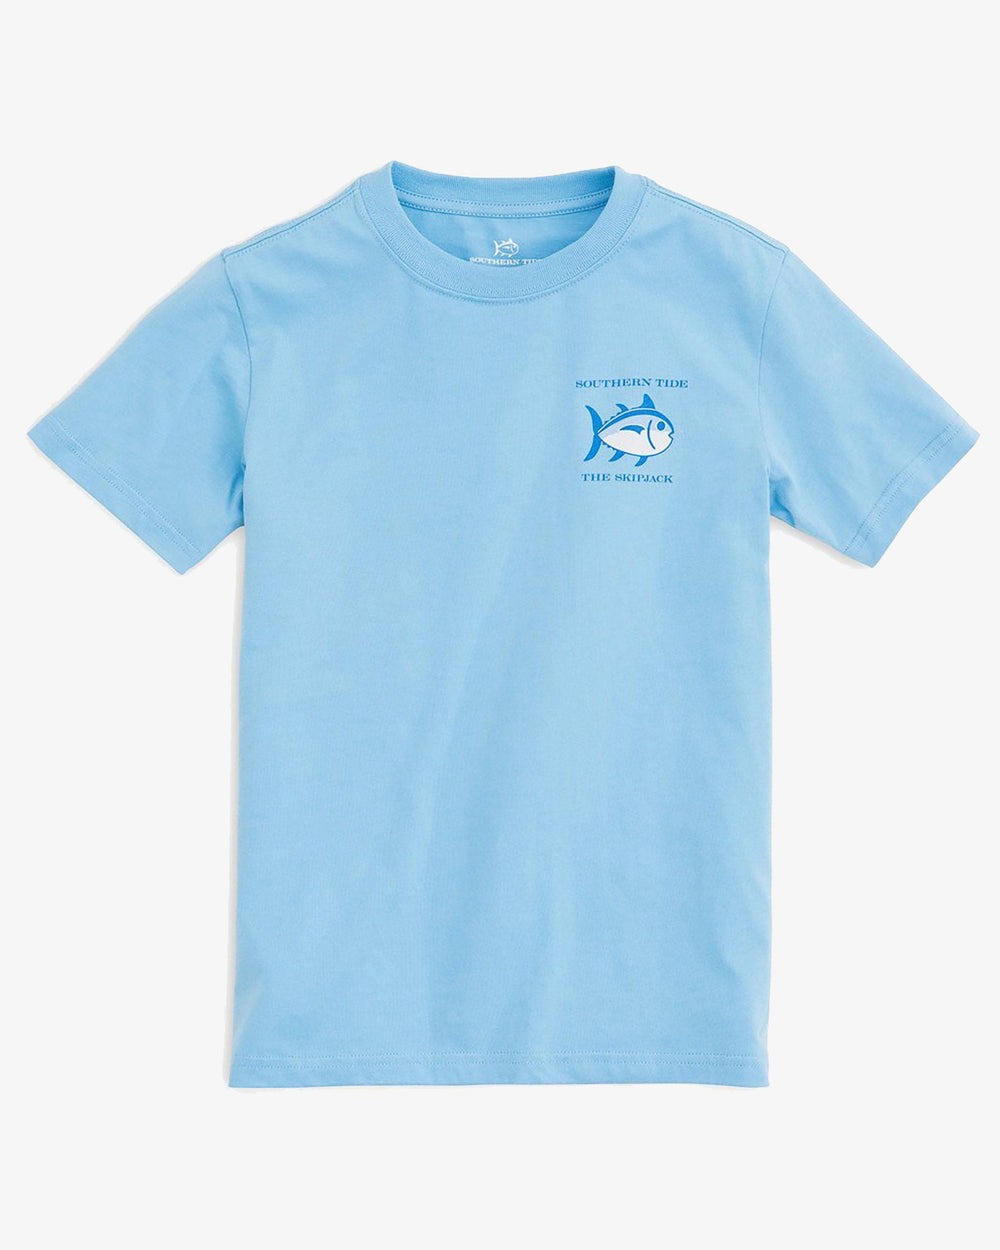 The front view of the Kid's Blue Original Skipjack T-Shirt by Southern Tide - Ocean Channel